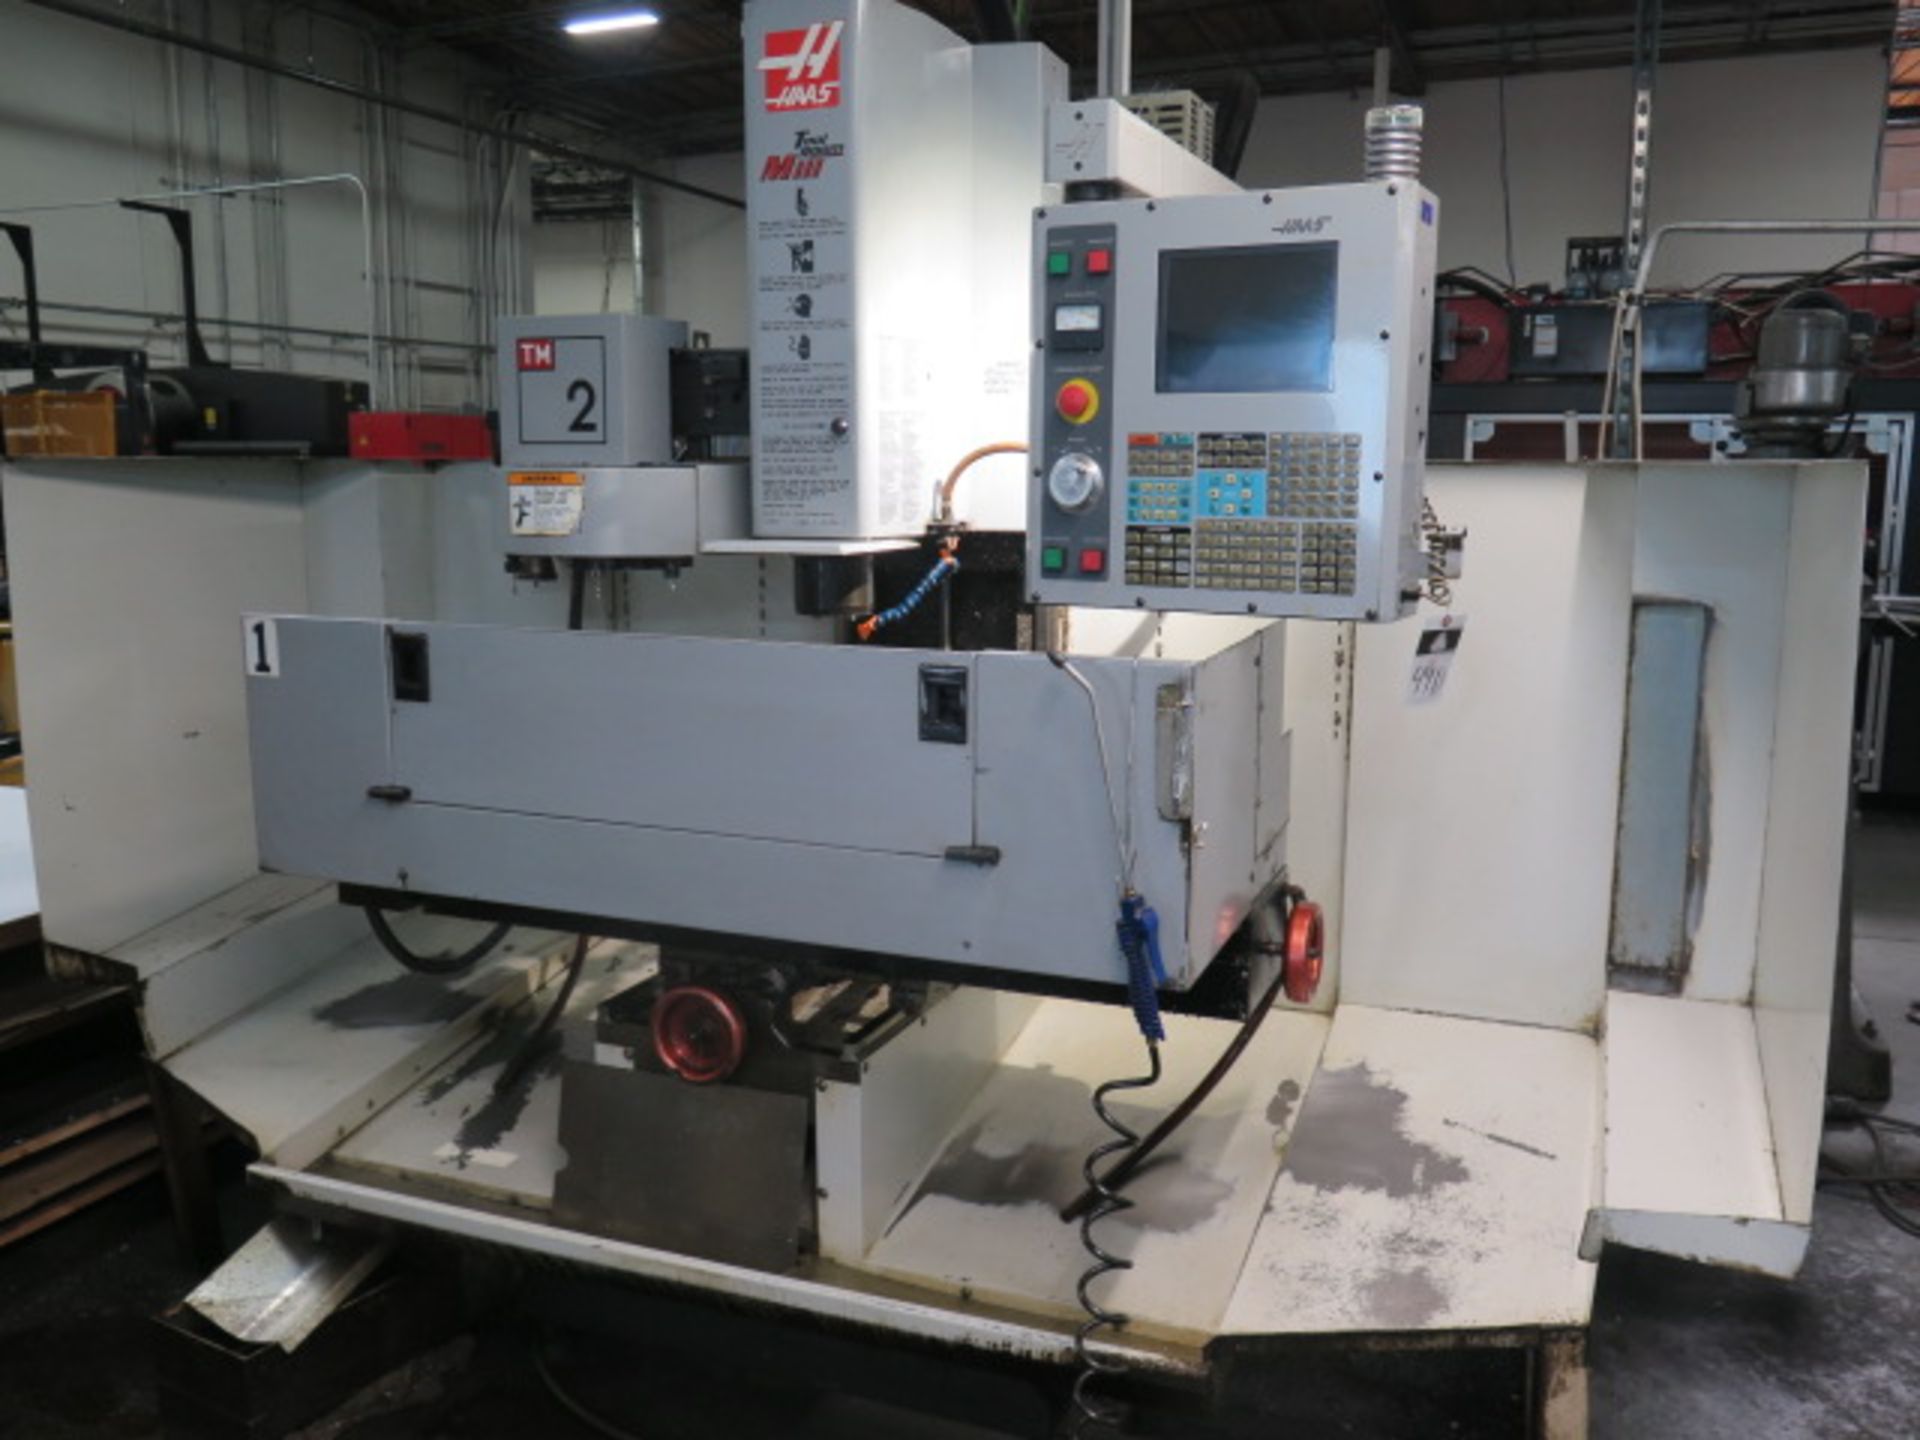 2004 Haas TM-2 “Mini Mill” CNC VMC s/n 37711 w/ Haas Controls, 10 ATC, SOLD AS IS, LIVERMORE, CA - Image 2 of 15